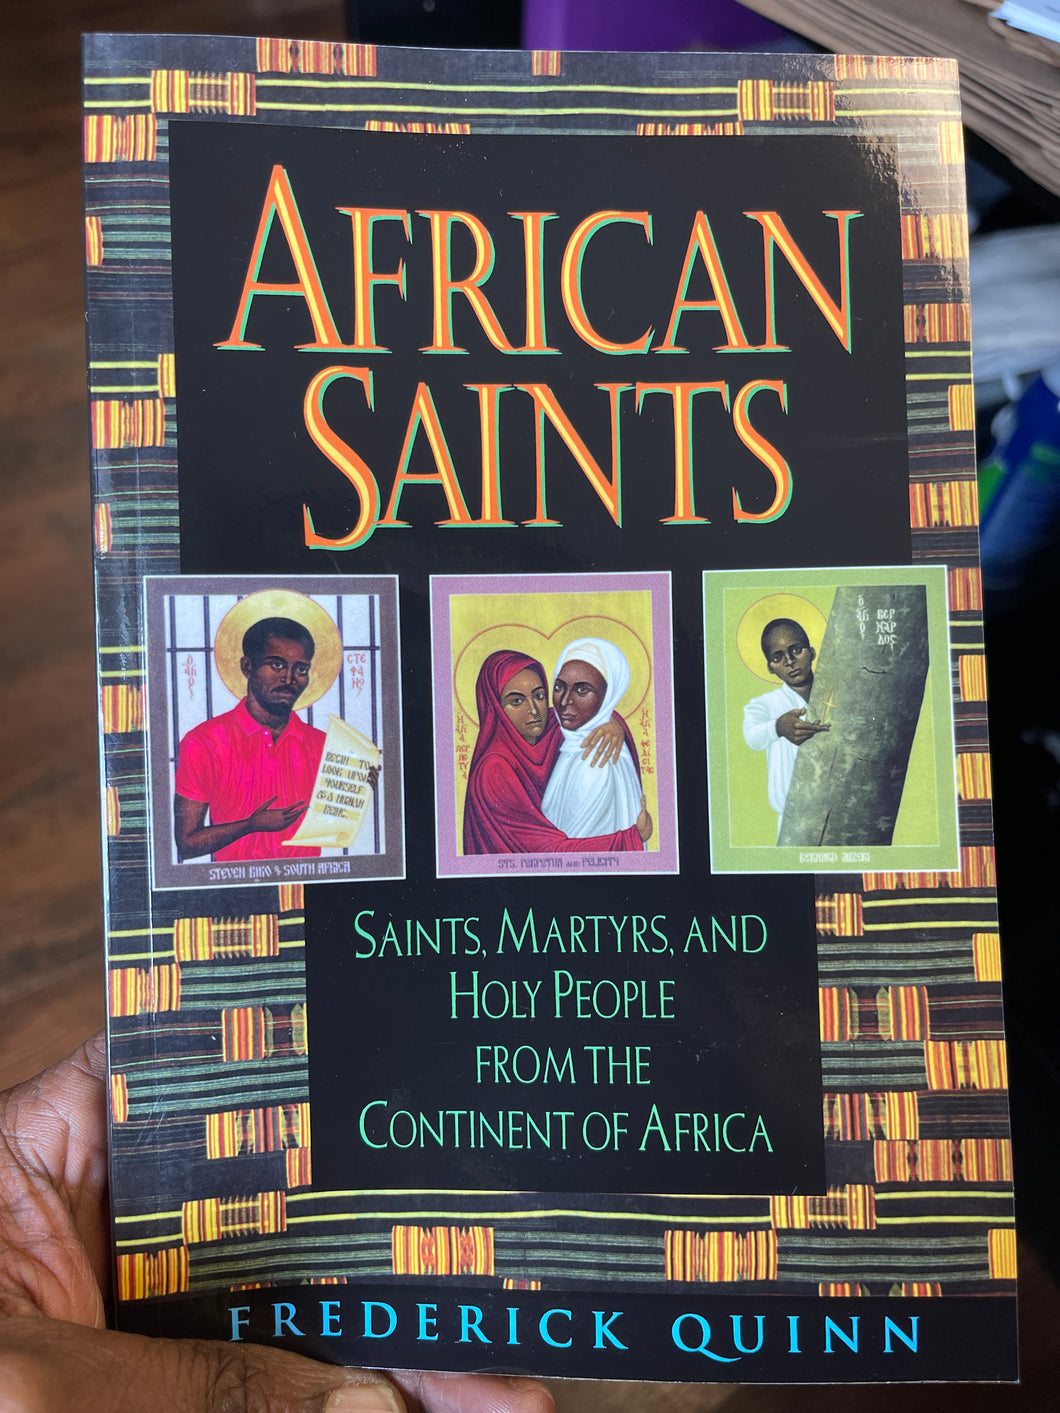 African Saints: Saints, Martyrs, and Holy People from the Continent of Africa